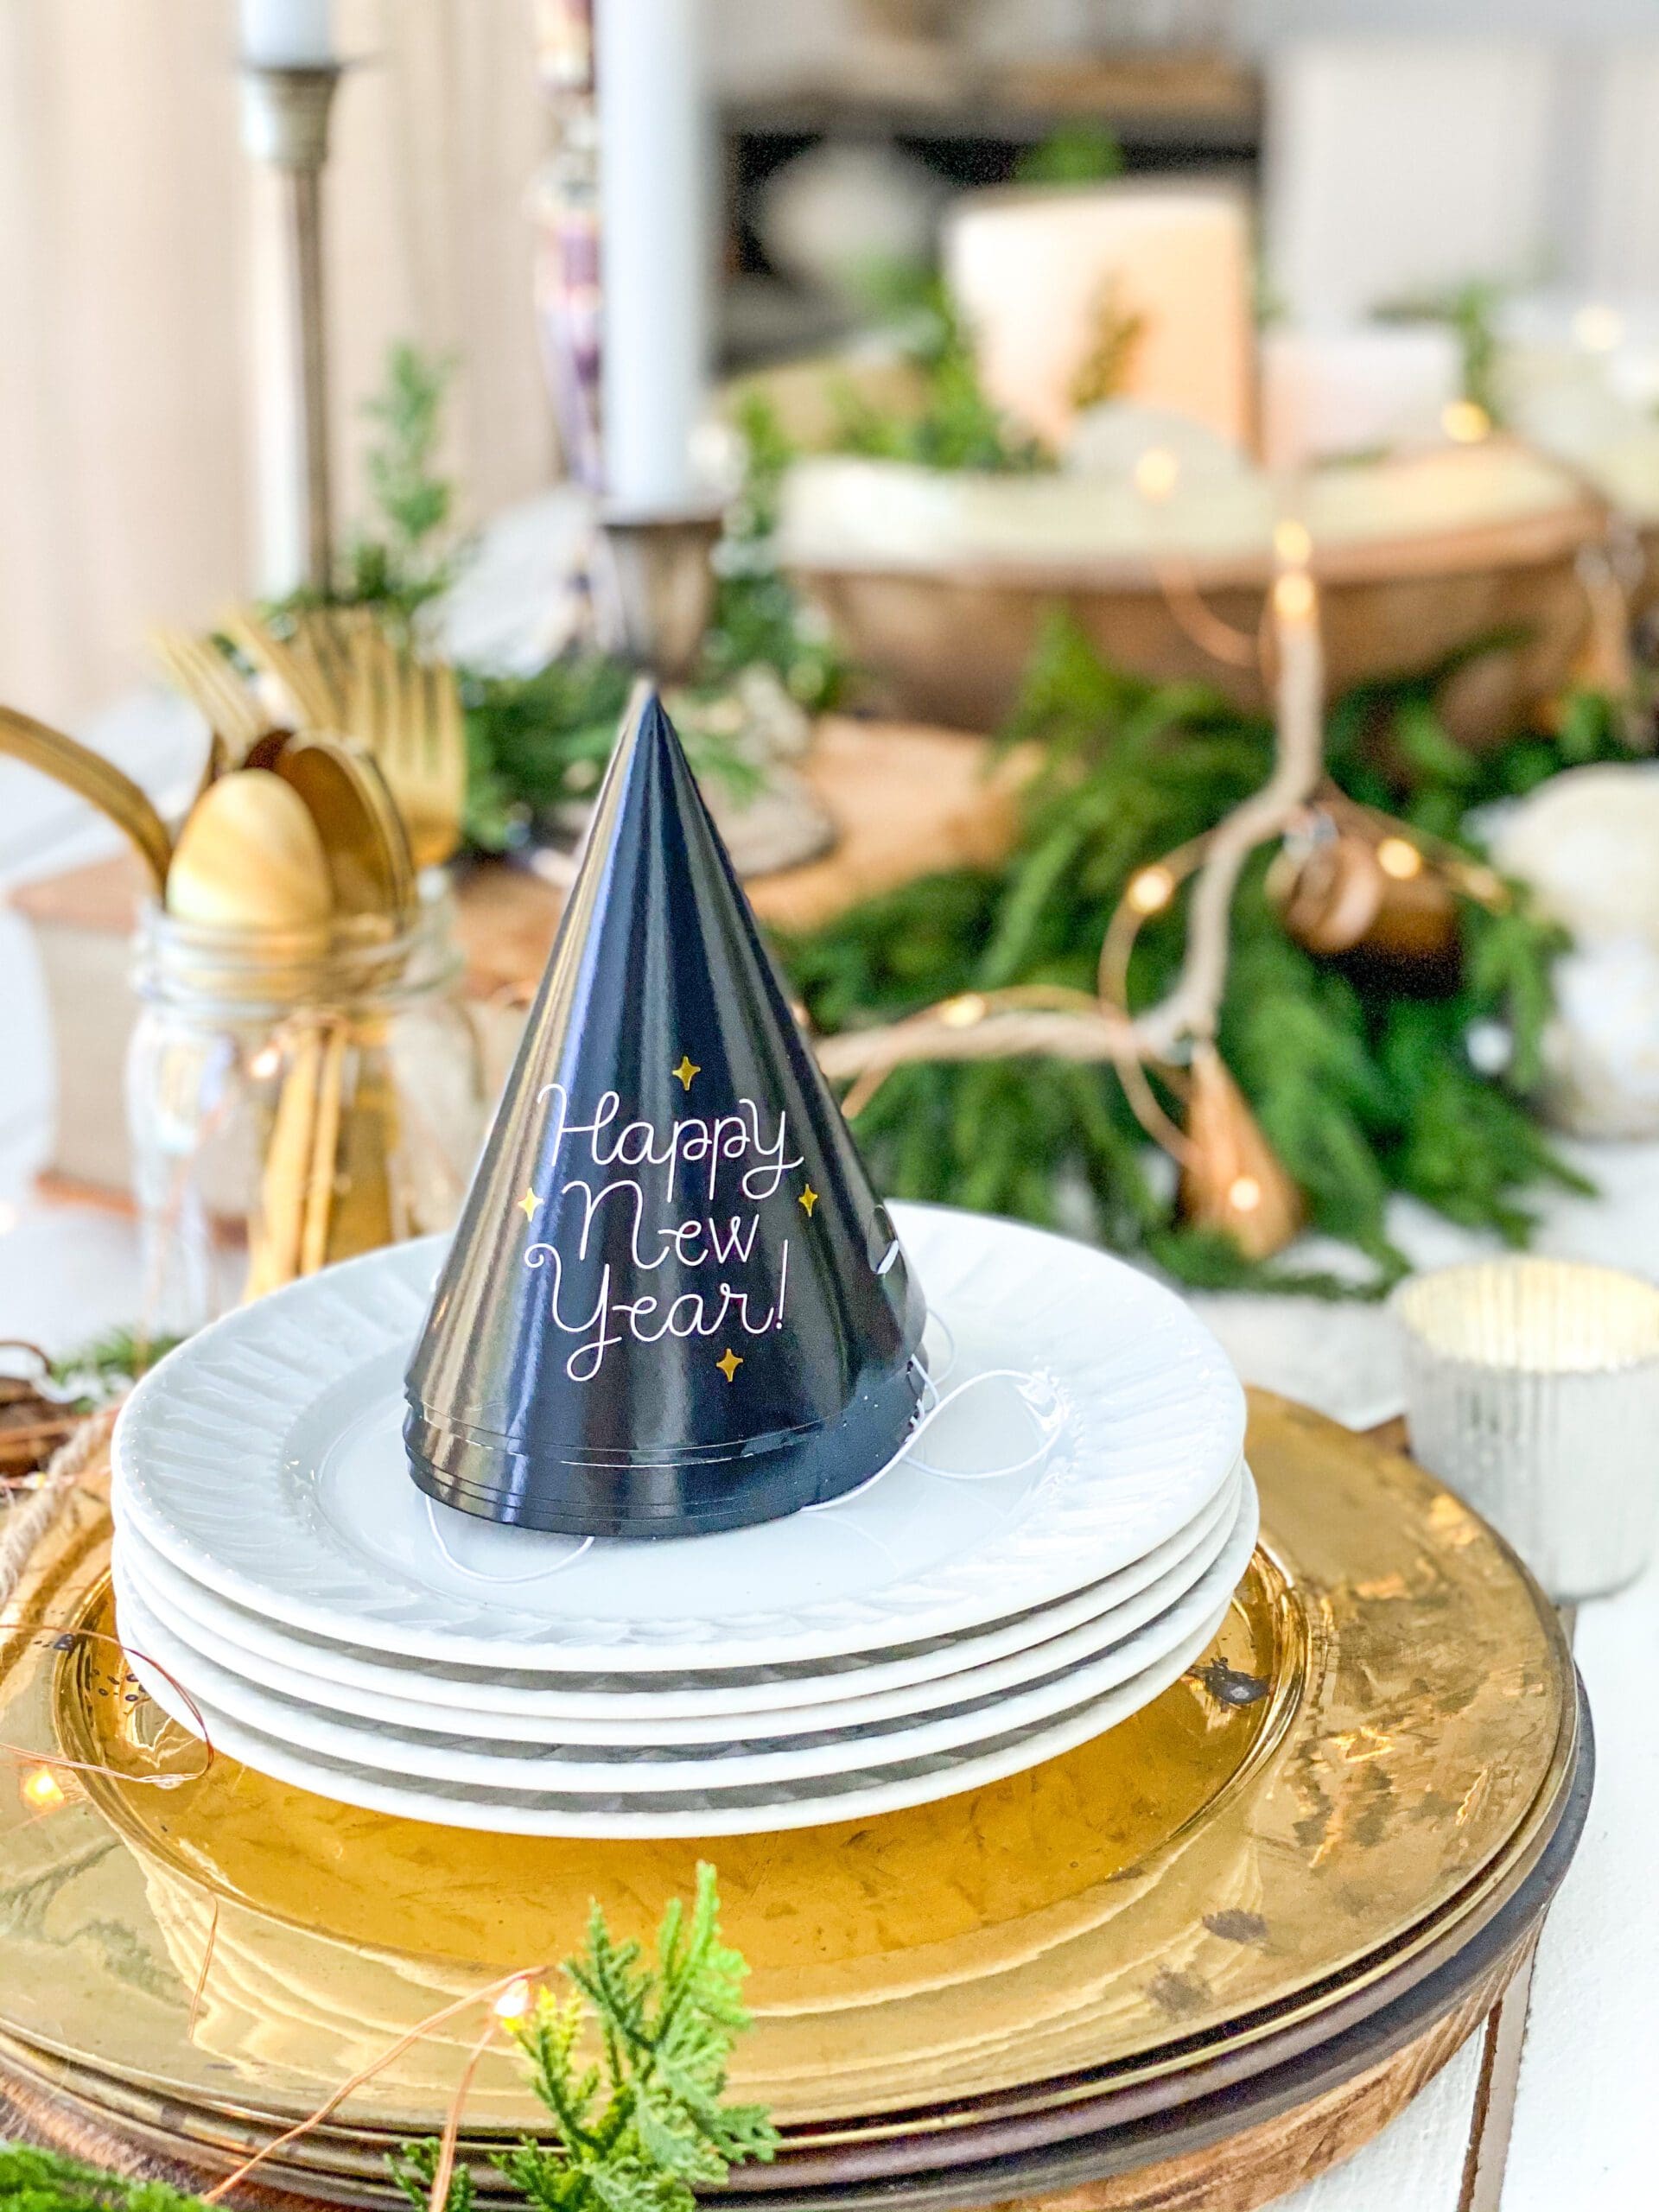 How to Make an Easy New Year’s Eve Centerpiece